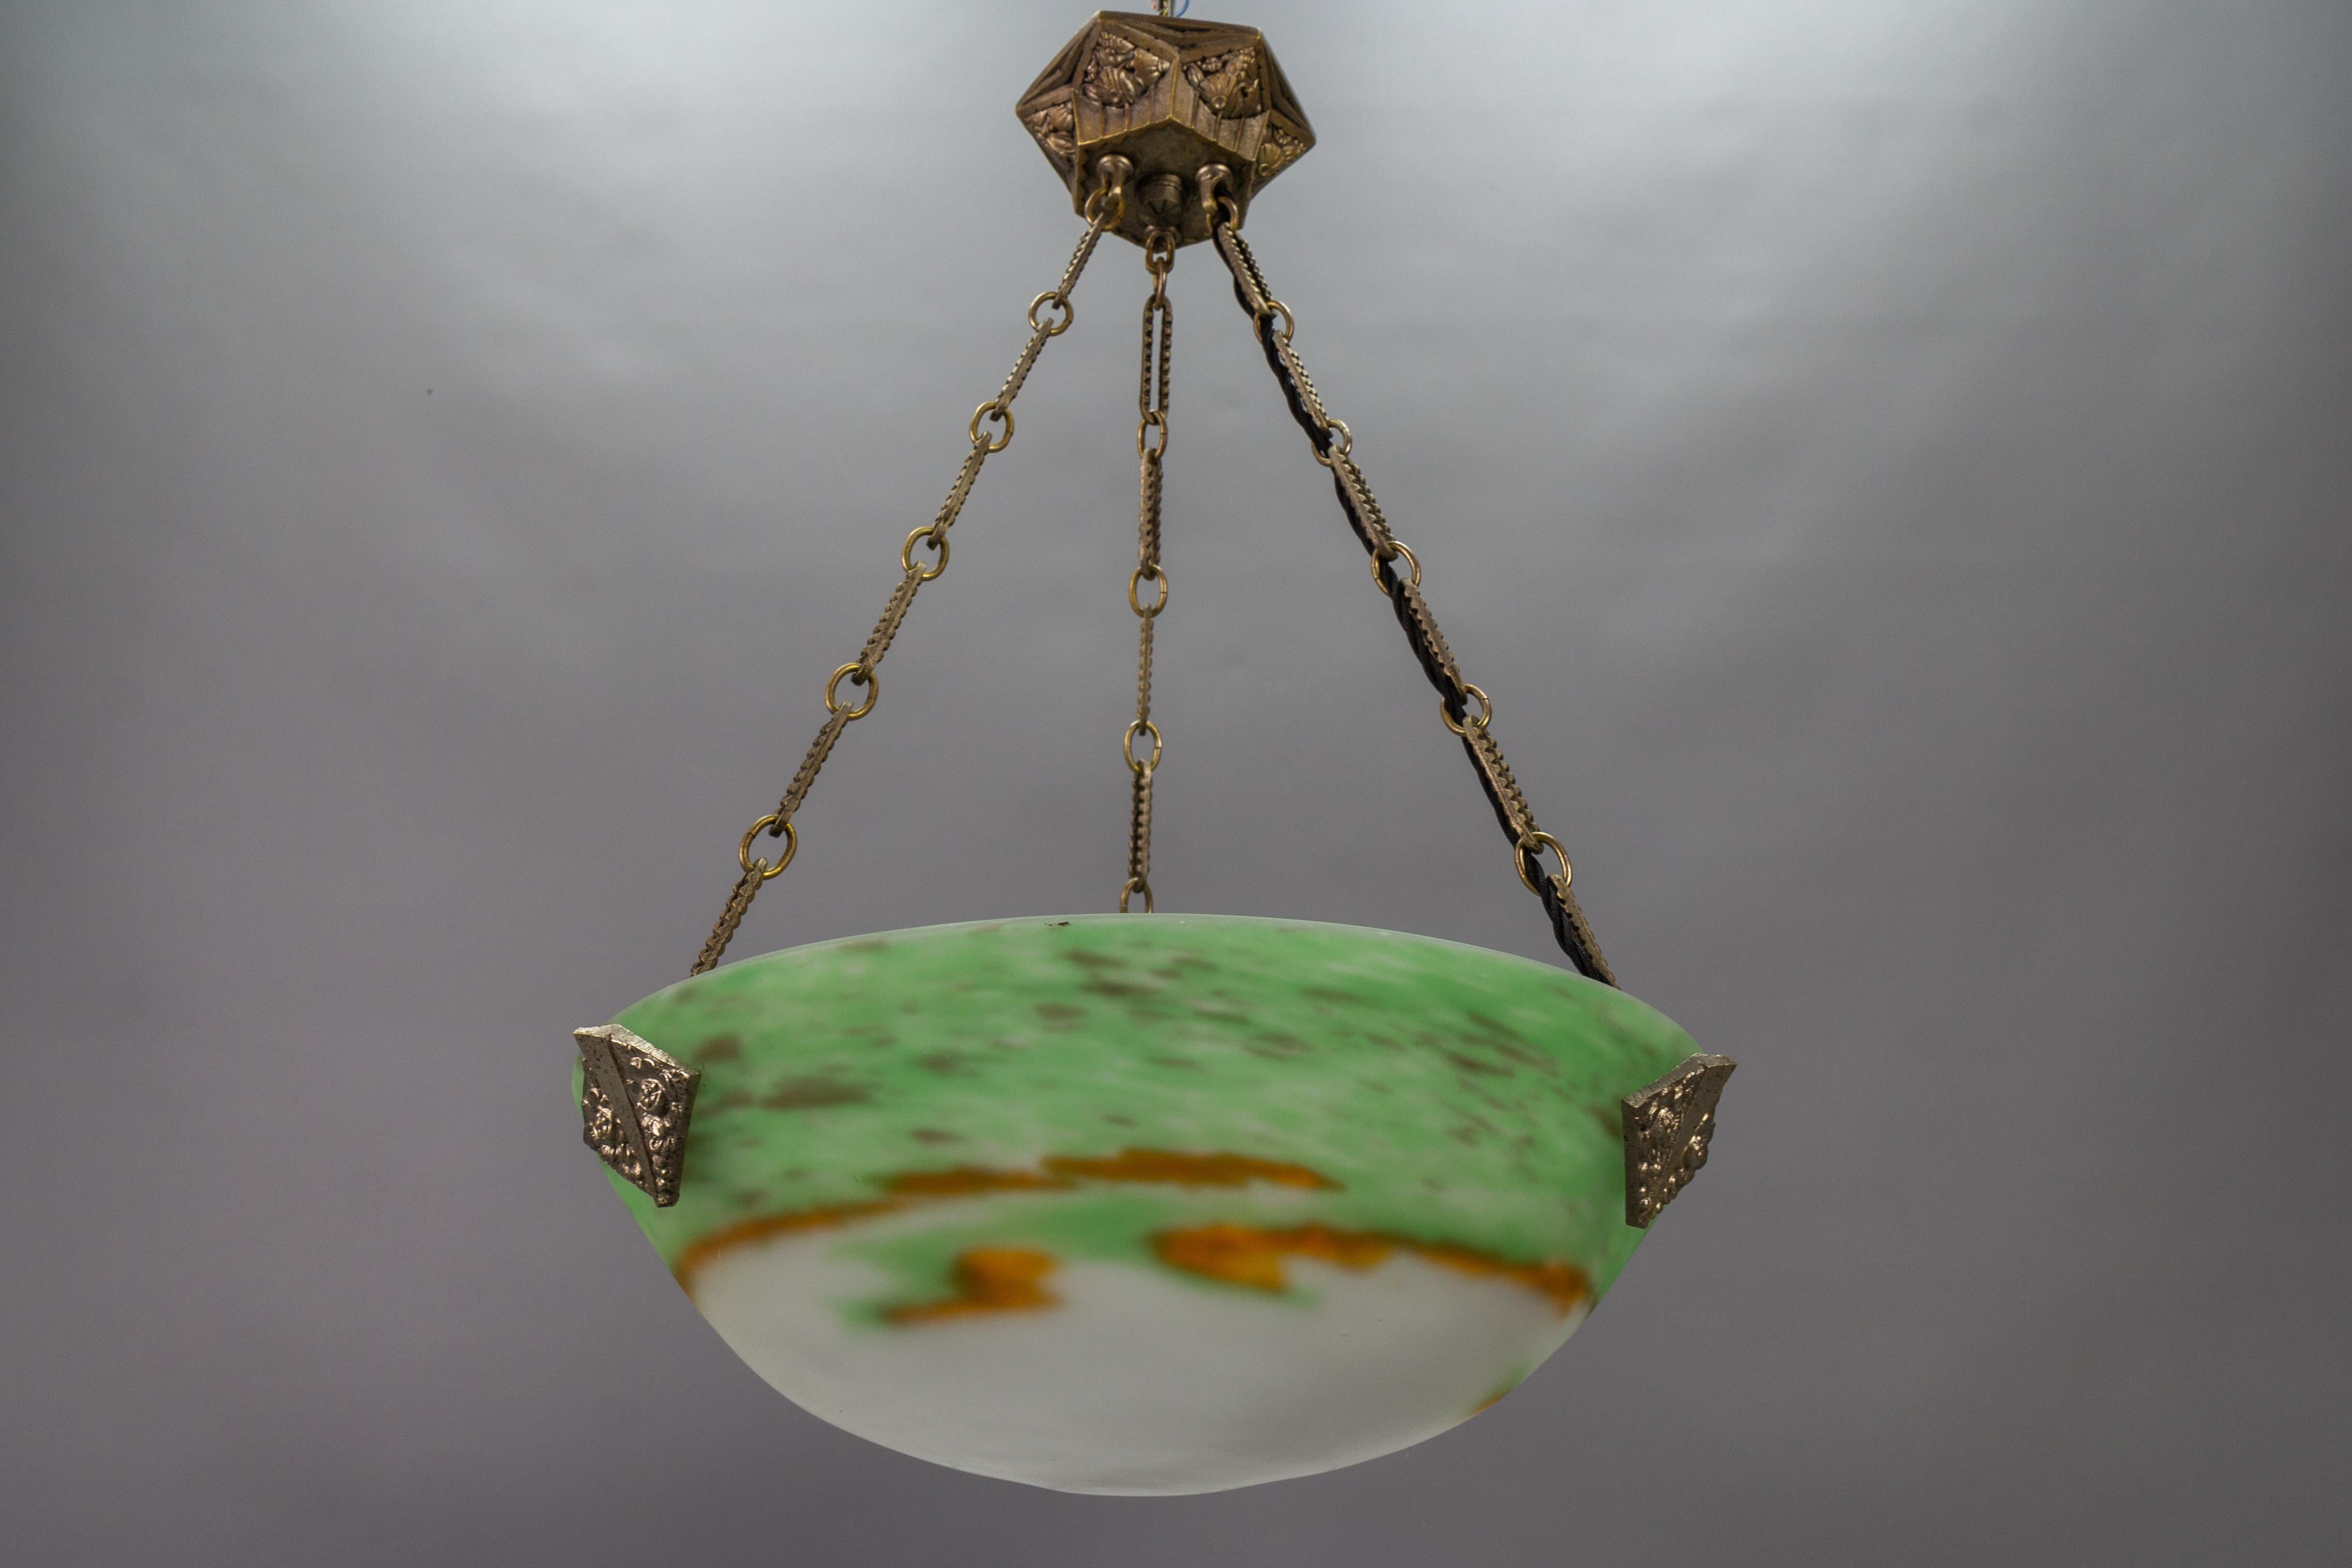 French Art Deco bronze and Pâte de Verre glass pendant light fixture by Muller Frères Luneville from circa the 1920s.
This delightful French Art Deco period pendant light features a green and white color 'Pâte de Verre' glass bowl with orange tones.